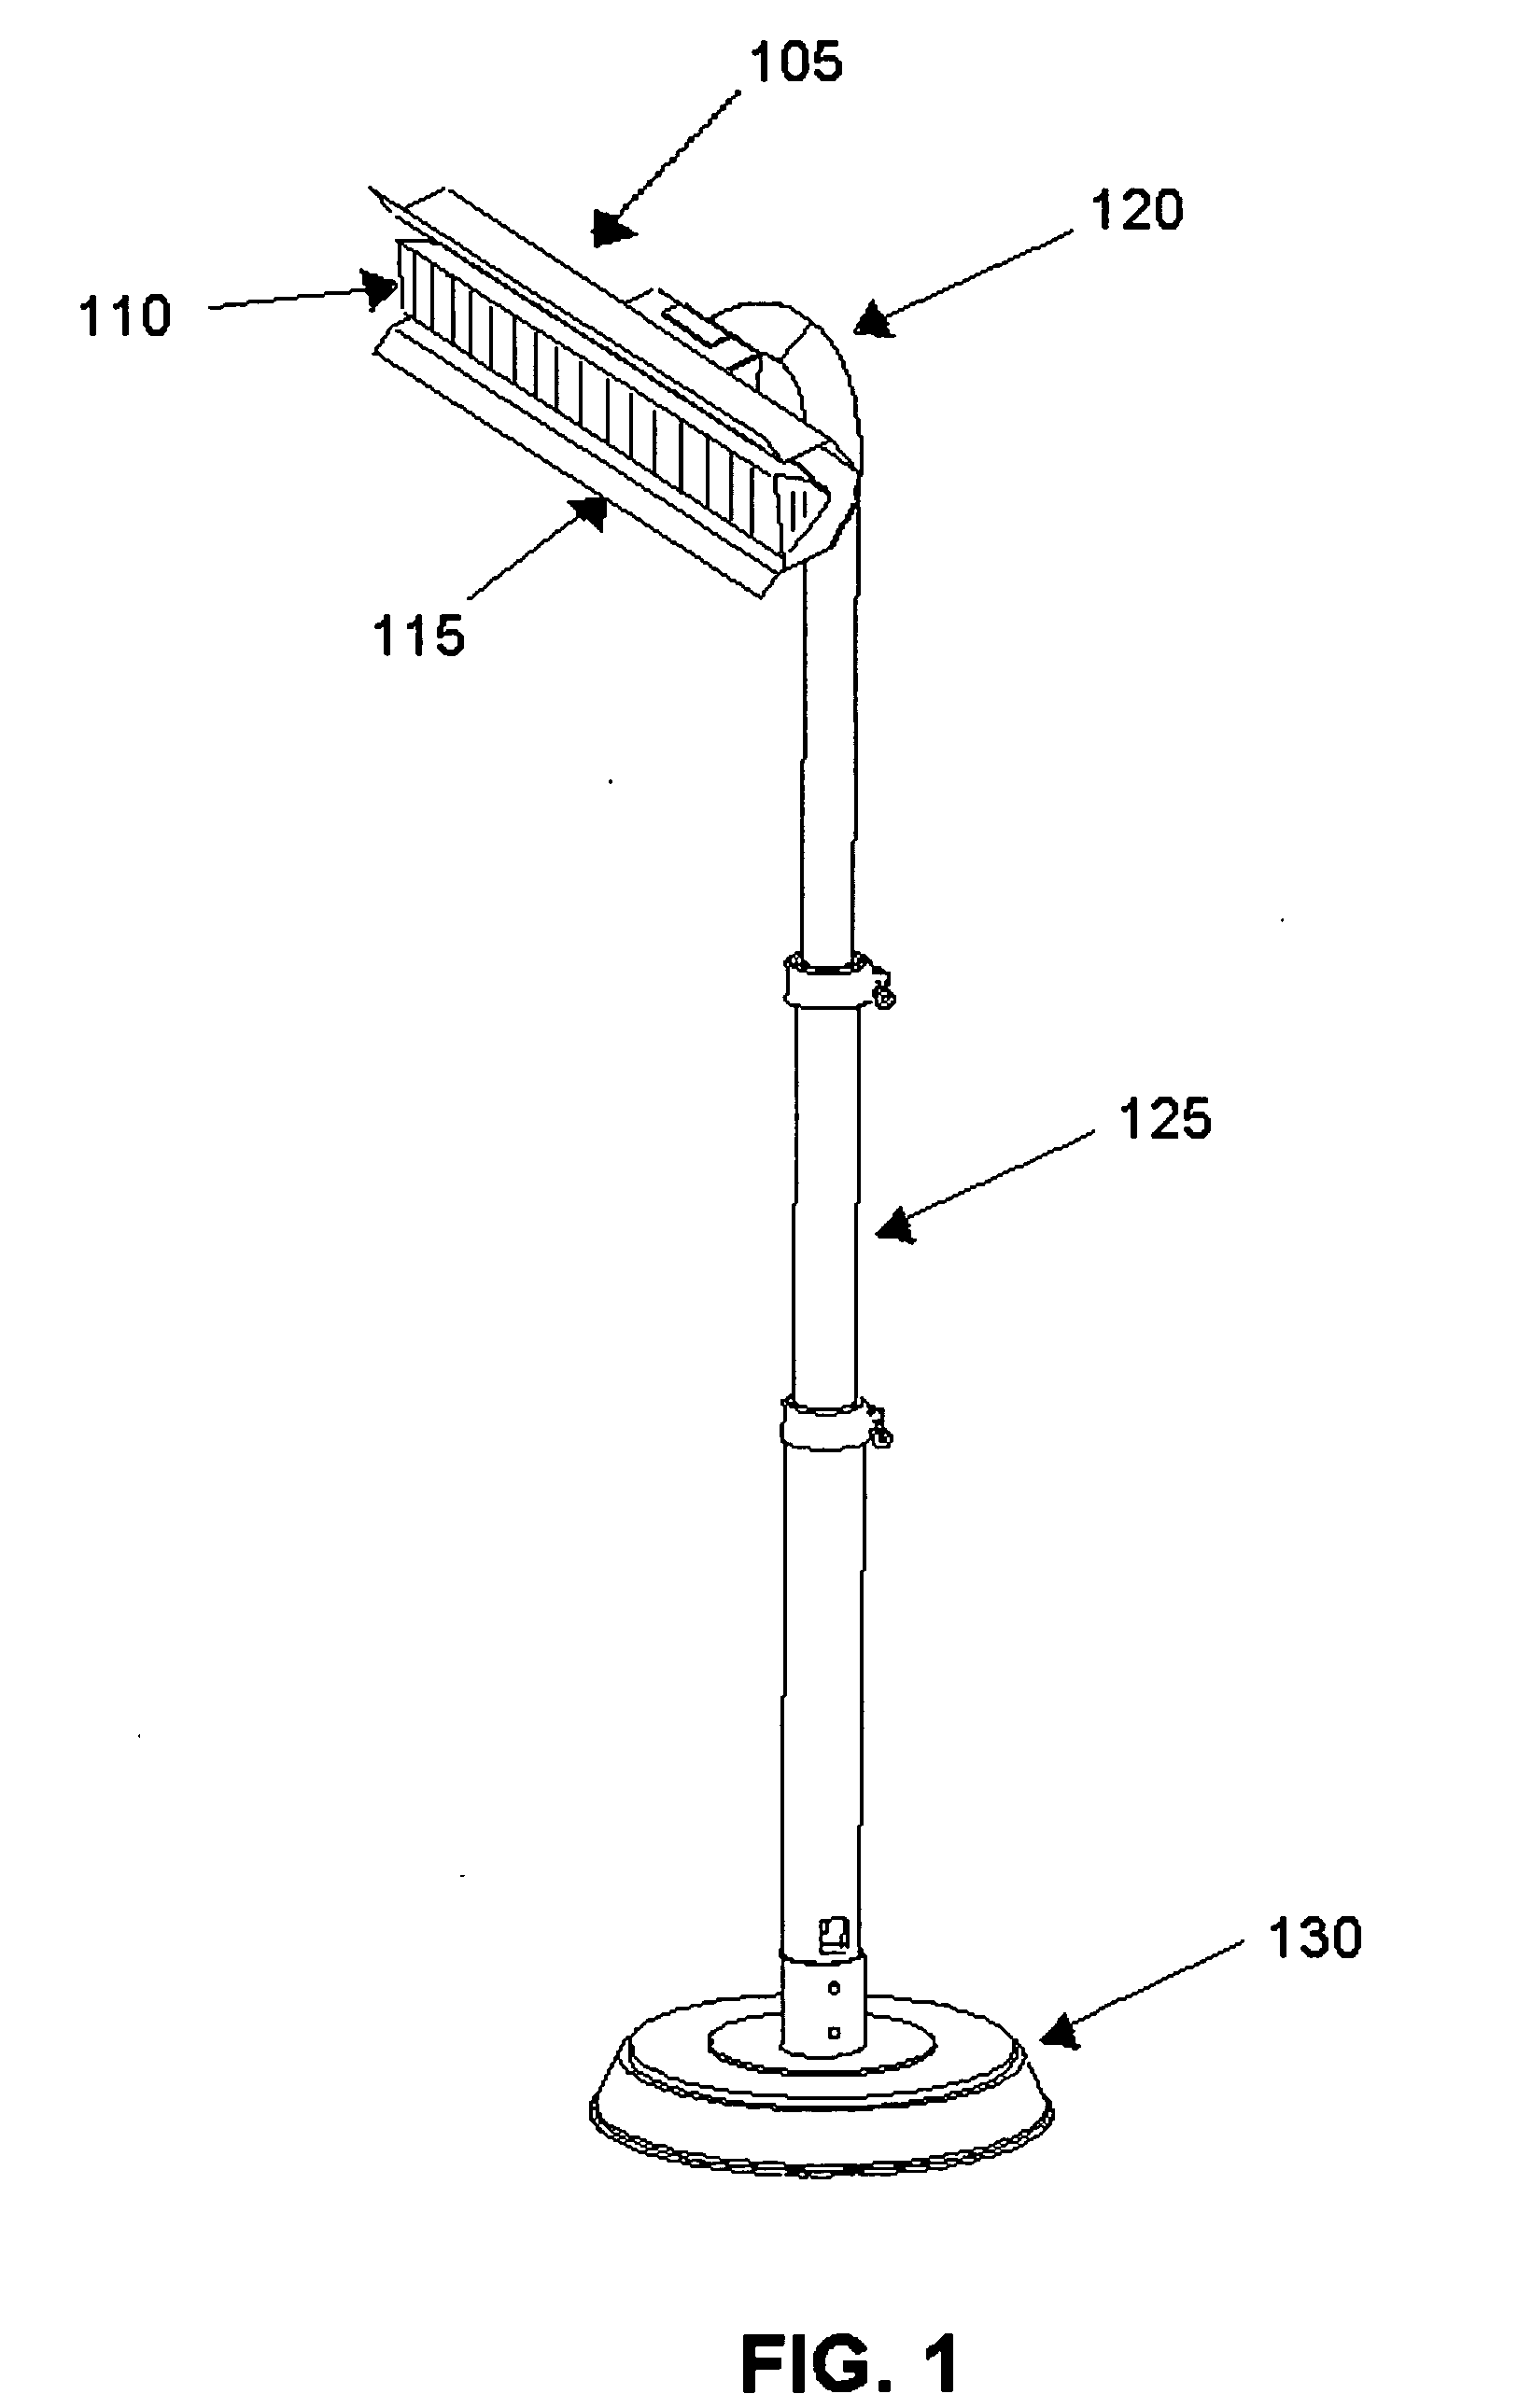 System of short-wave-infrared heater support assembly